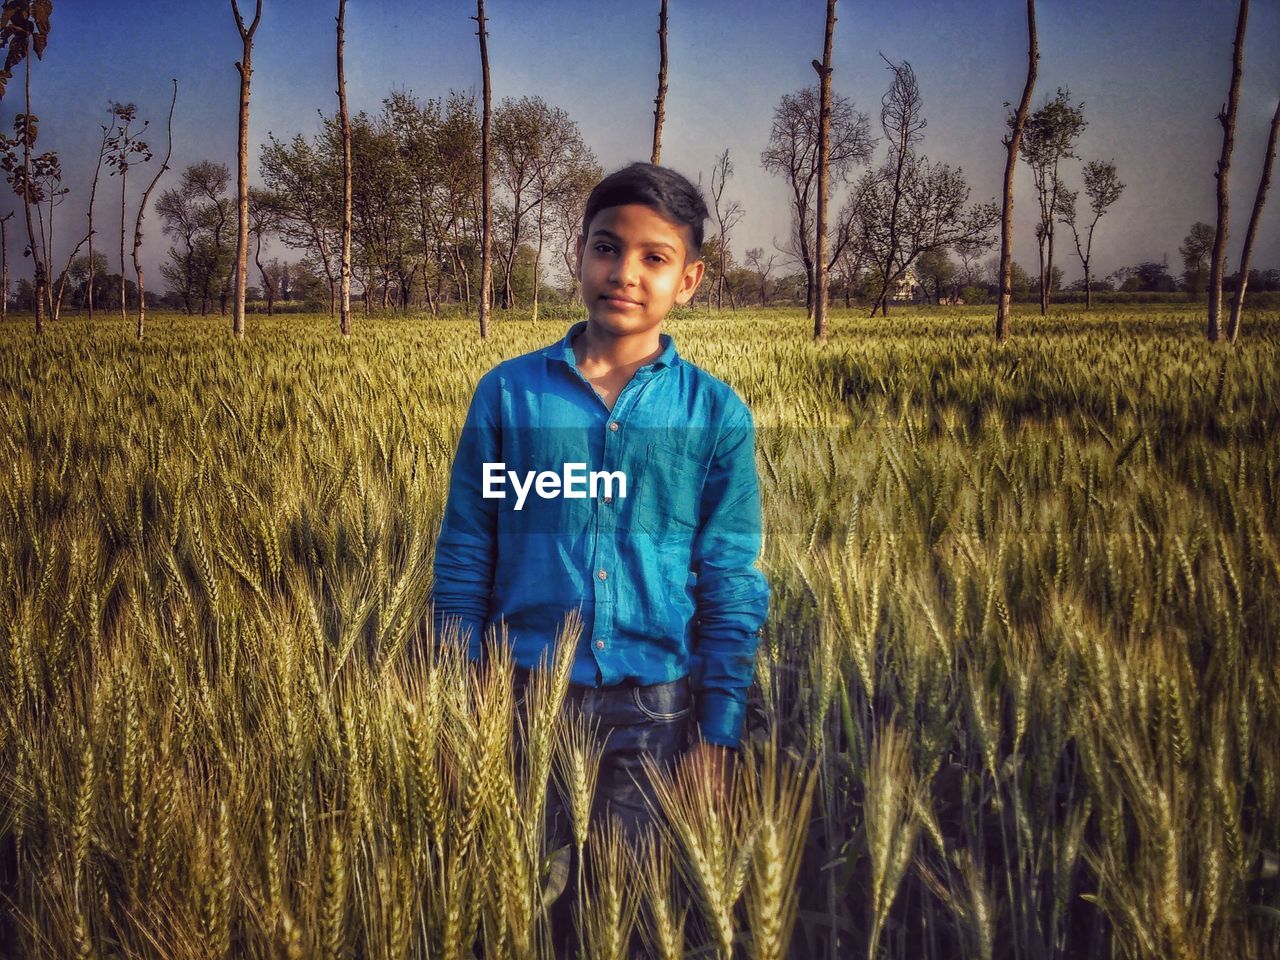 Portrait of boy standing amidst cereal plants on agricultural field